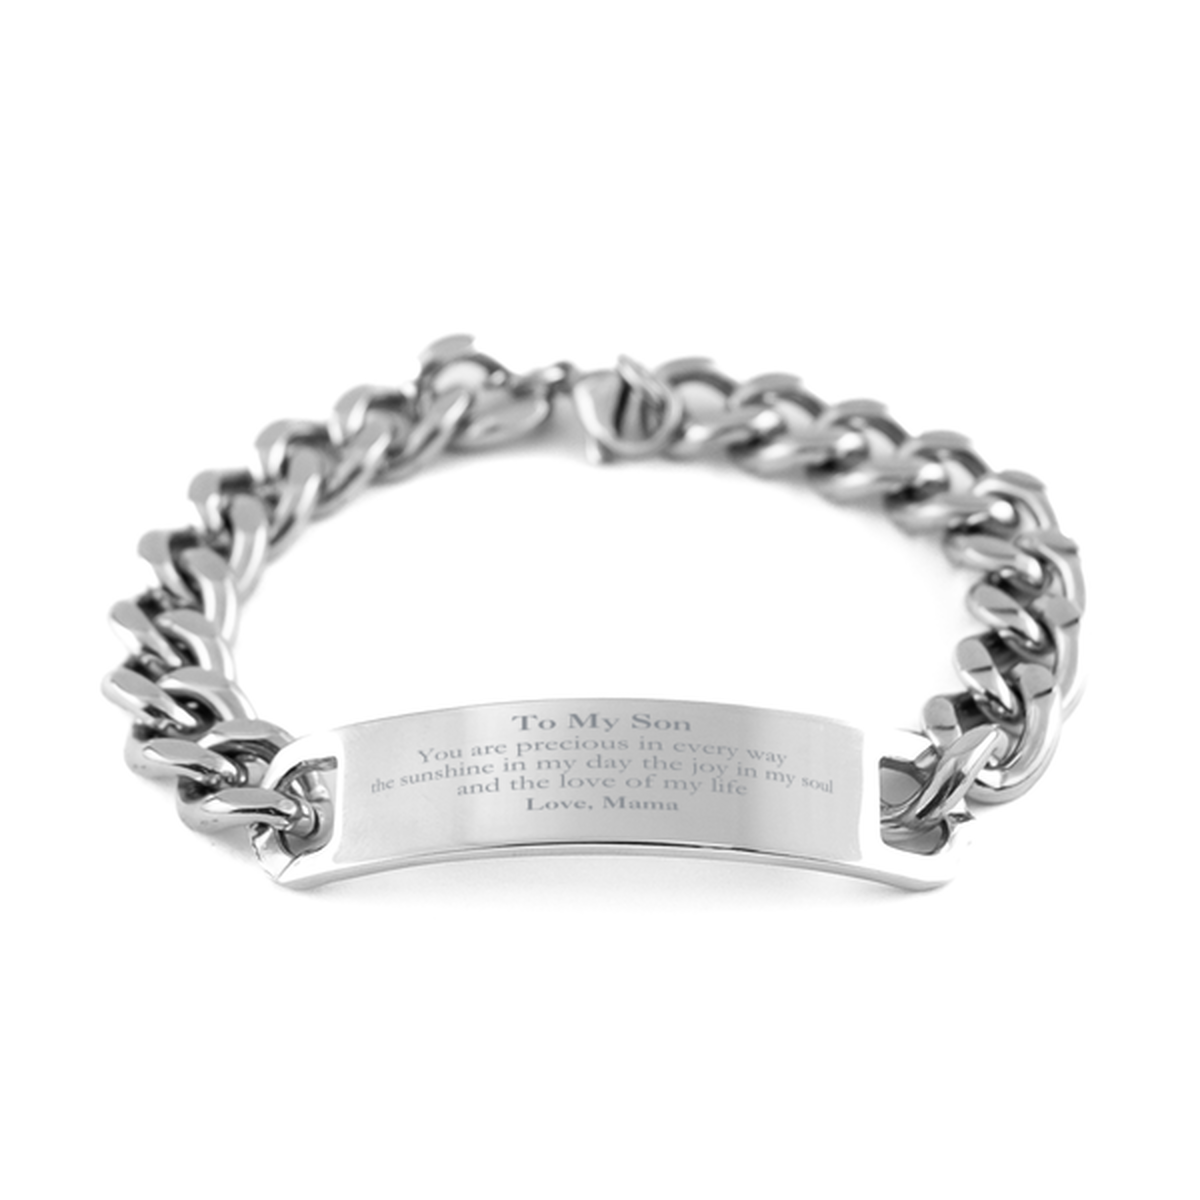 Graduation Gifts for Son Cuban Chain Stainless Steel Bracelet Present from Mama, Christmas Son Birthday Gifts Son You are precious in every way the sunshine in my day. Love, Mama